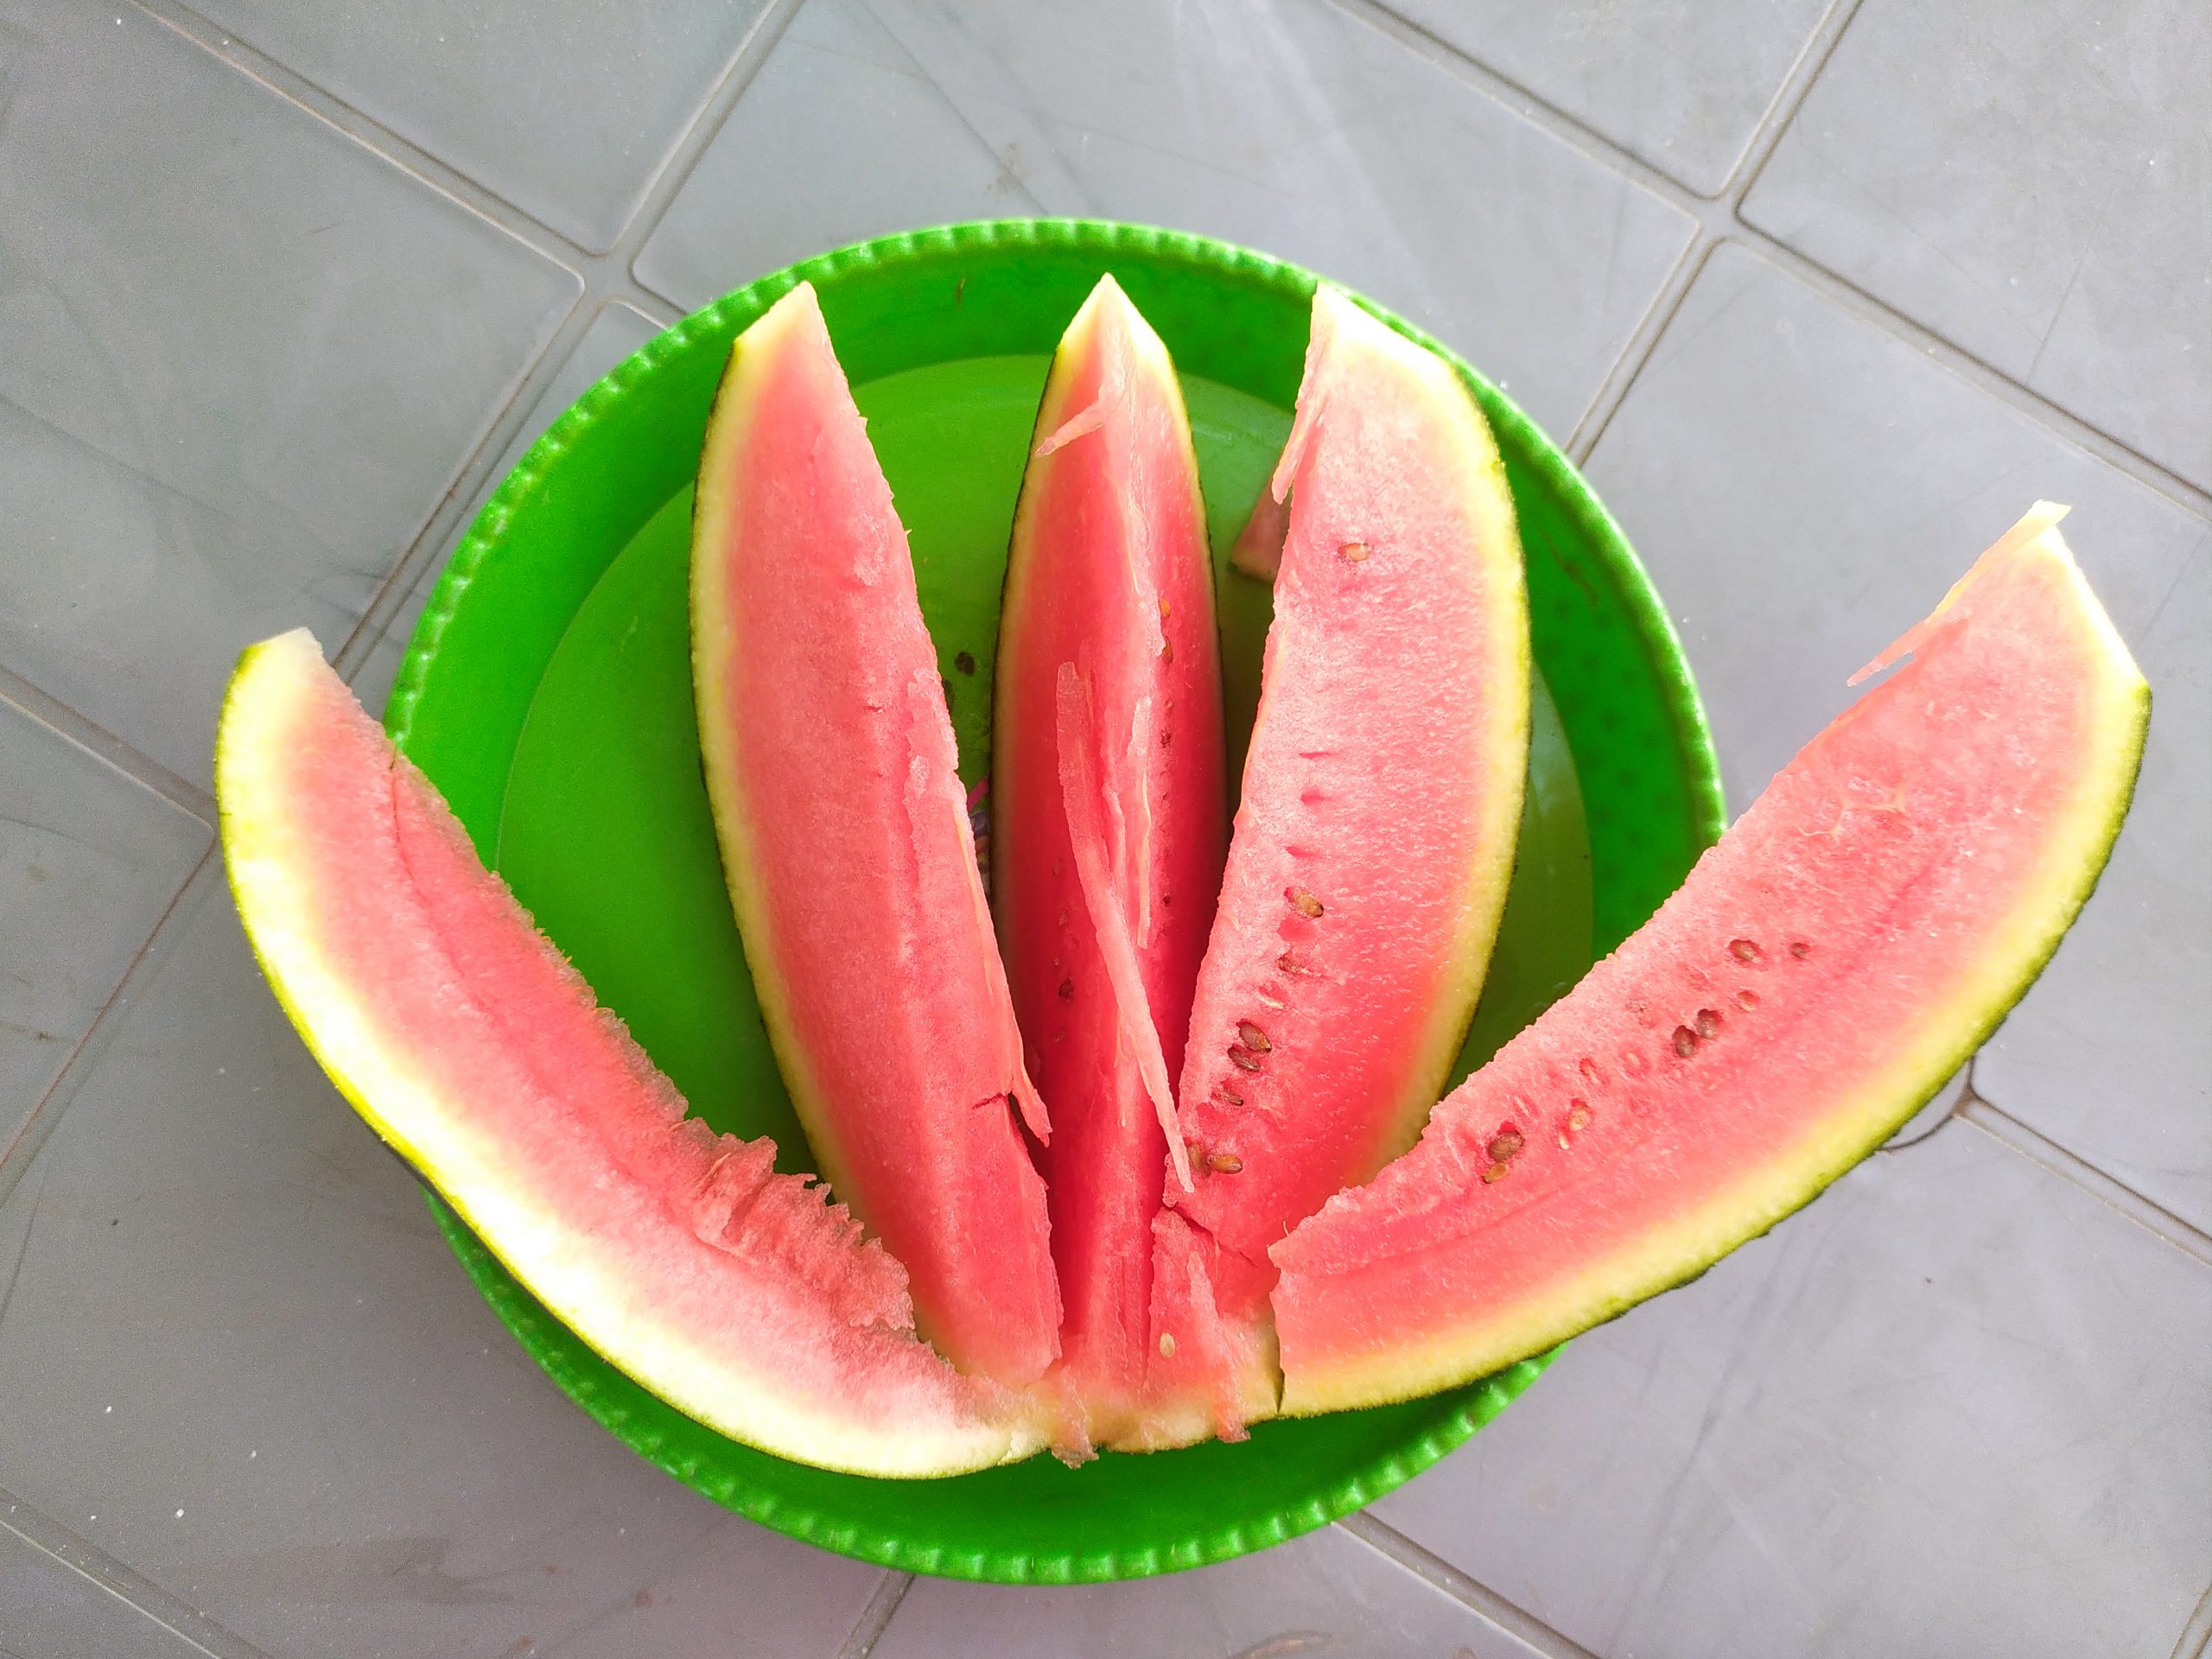 Watermelon slices on a plate